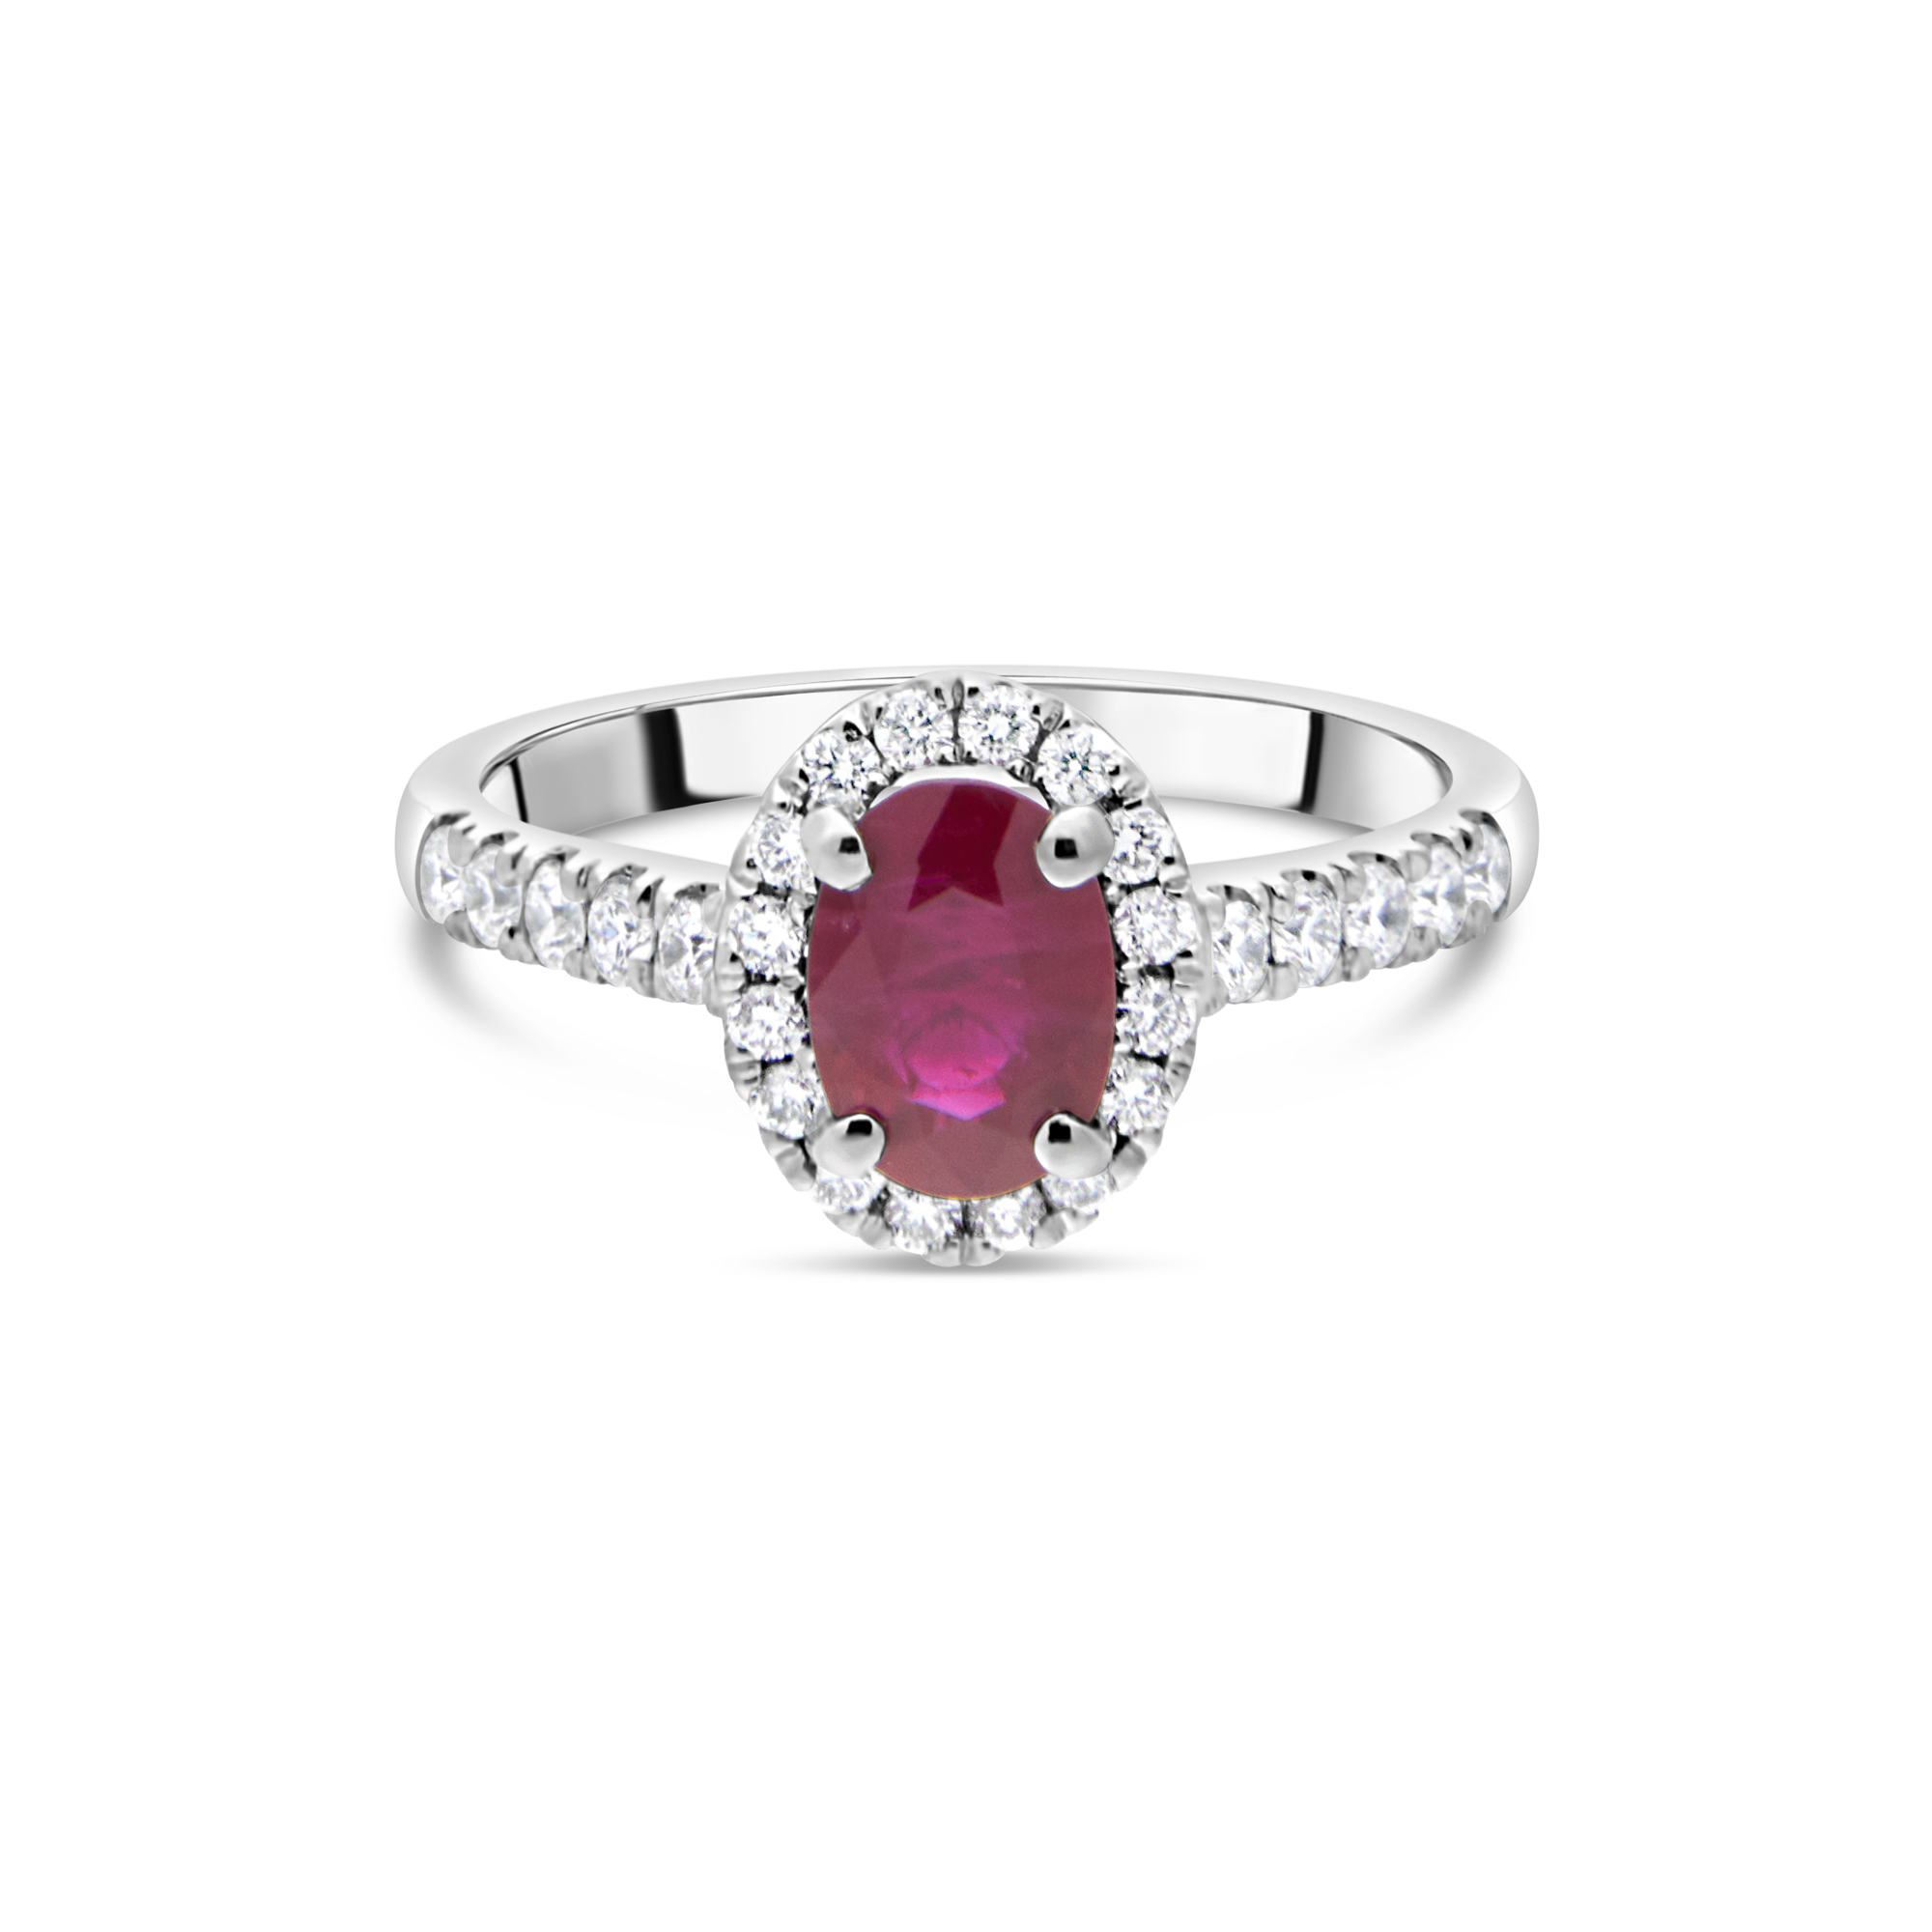 The "Corinne" with Ruby, Platinum